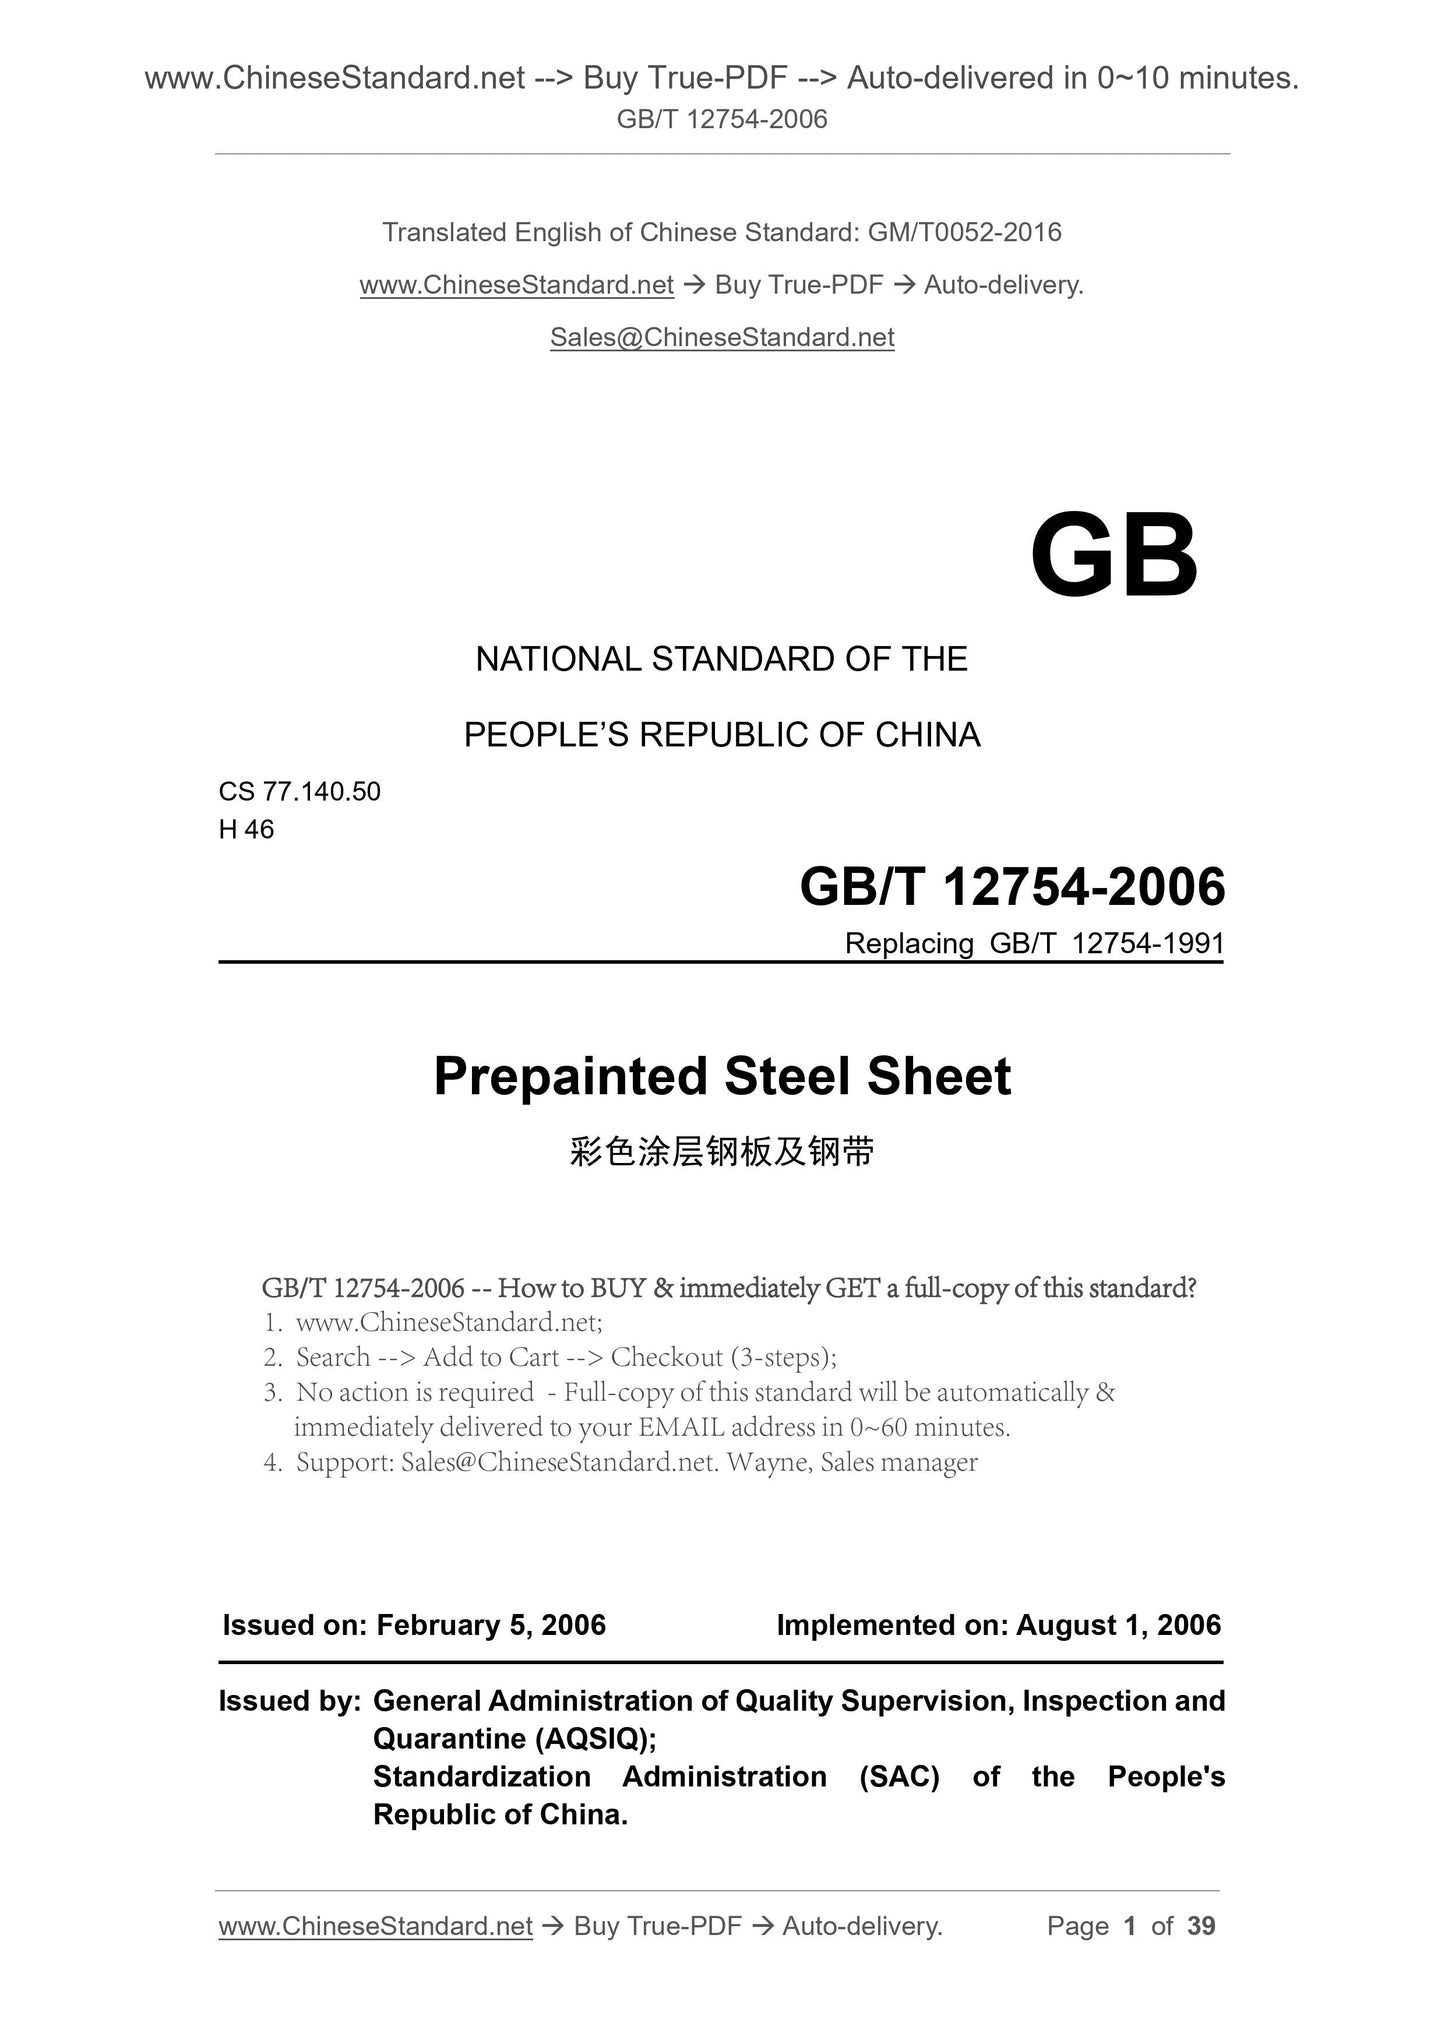 GB/T 12754-2006 Page 1